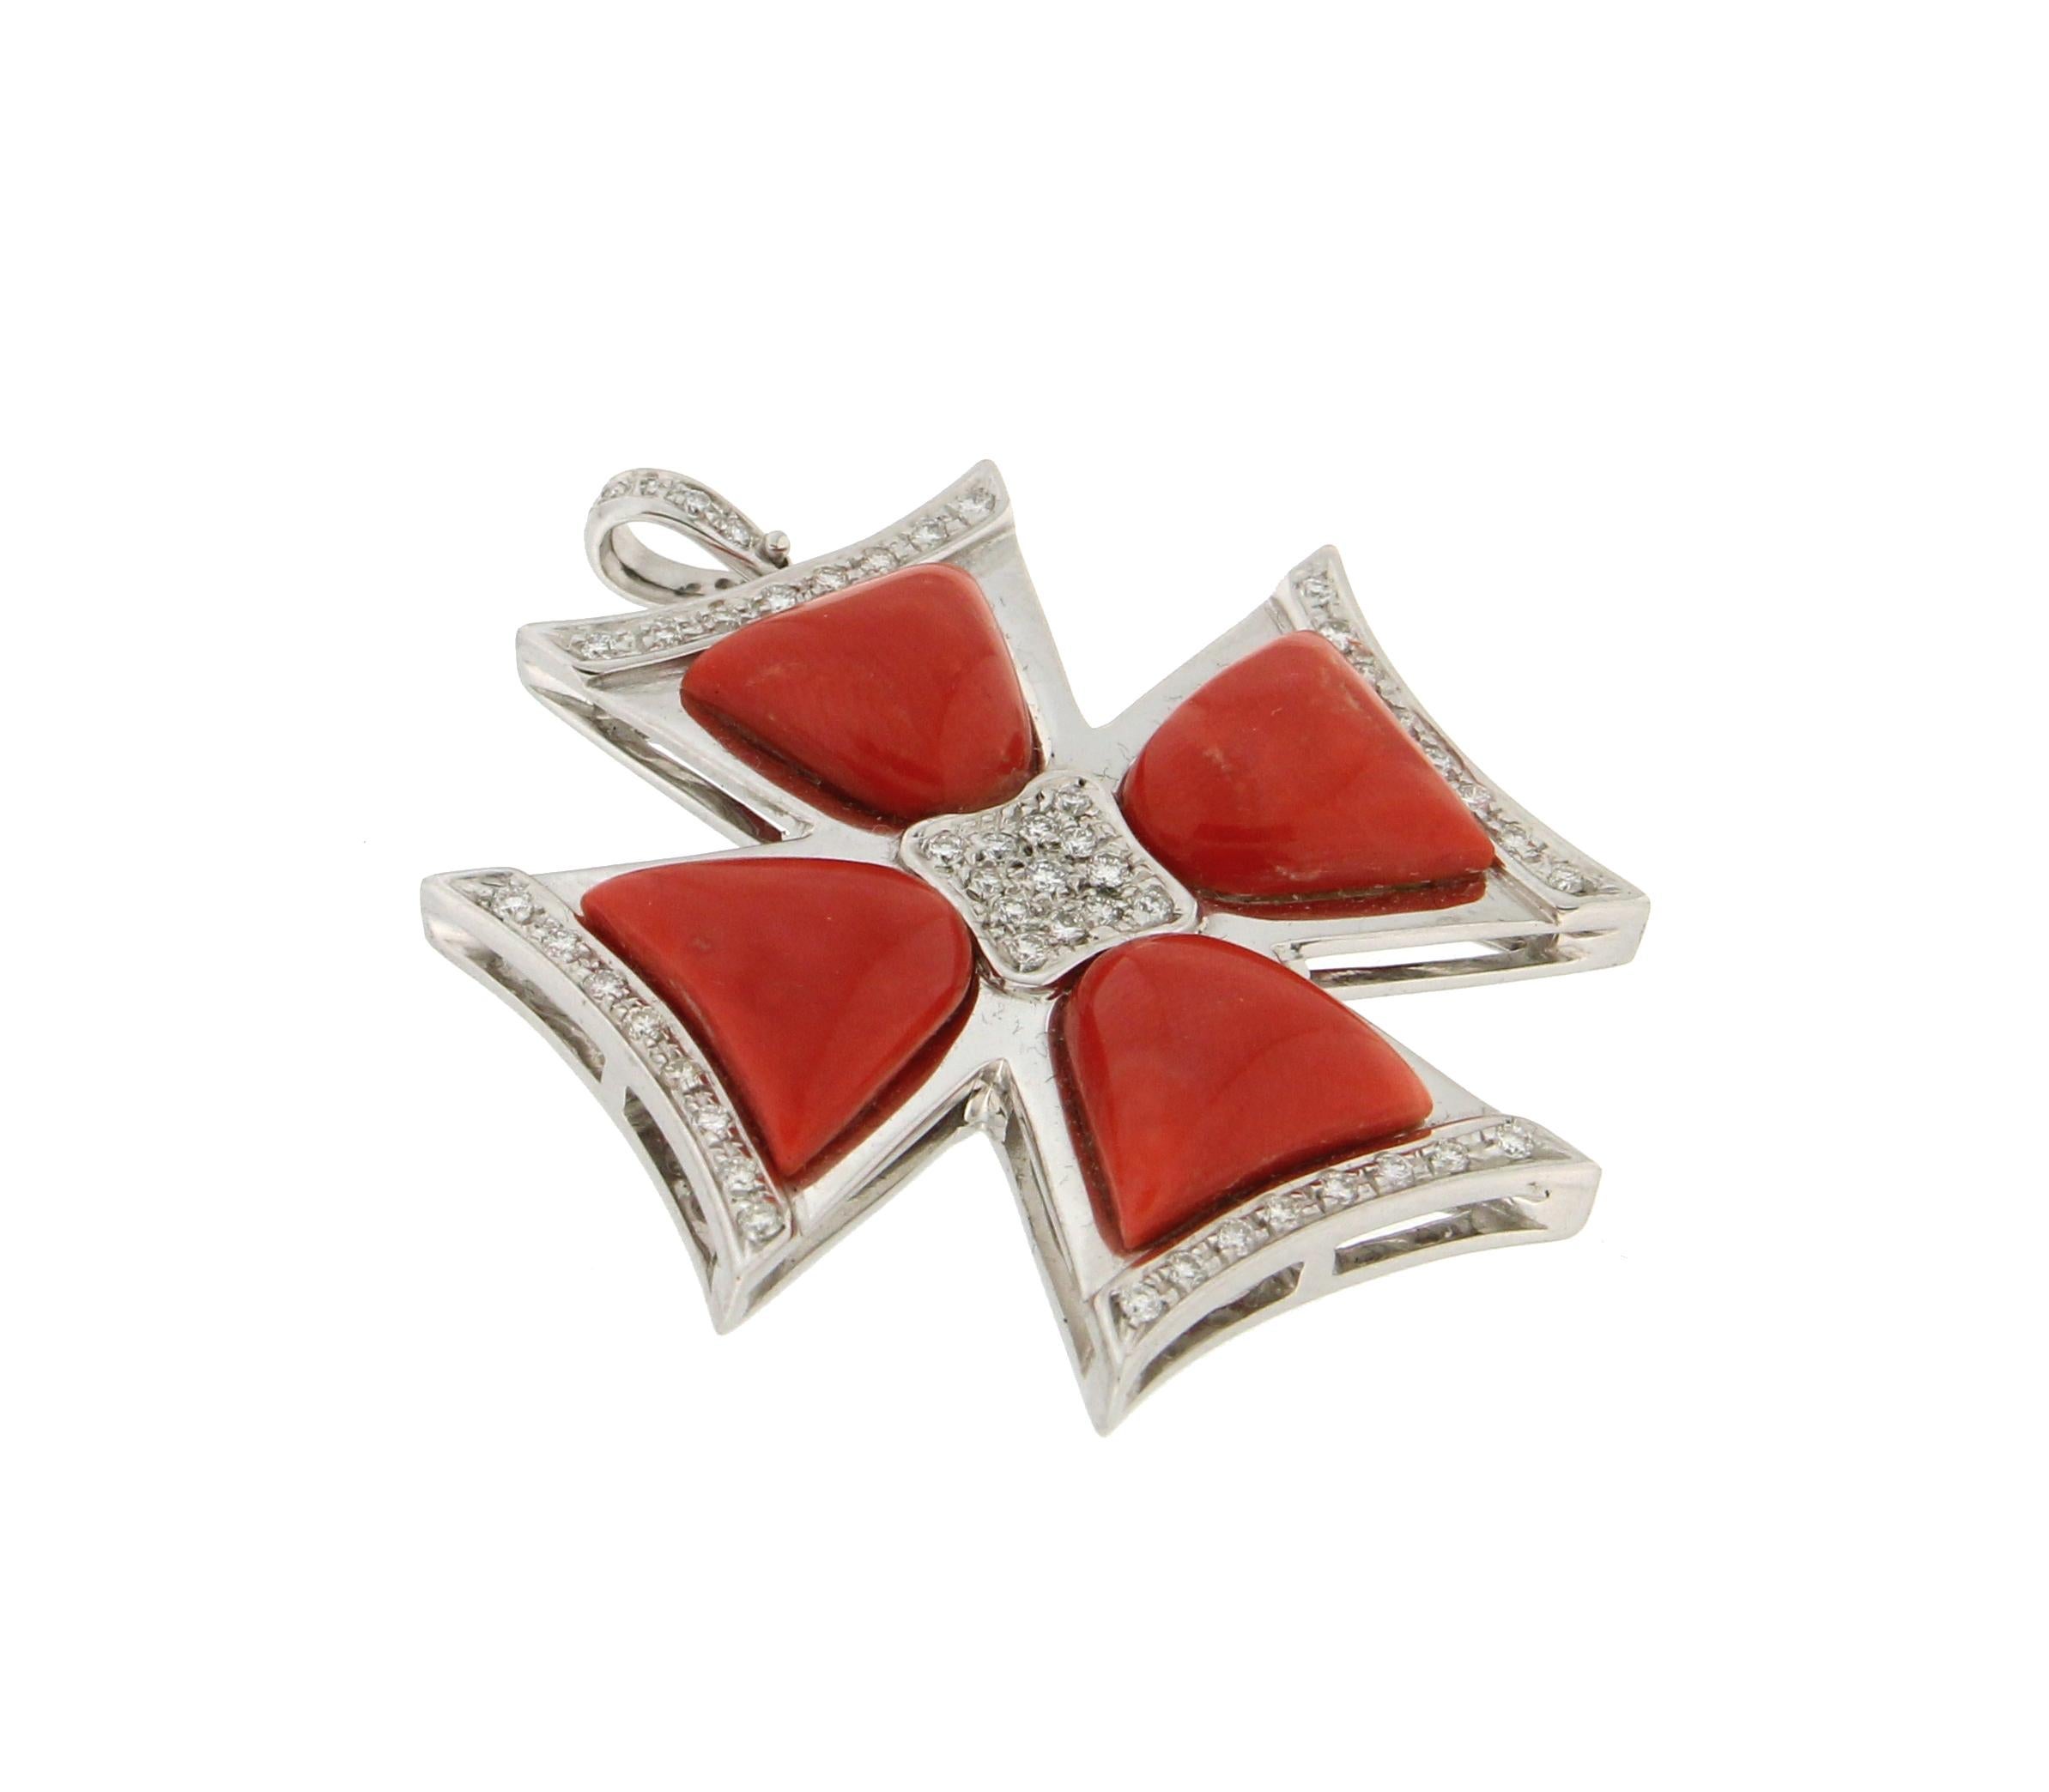 Artisan Handcraft Cross 18 Karat White Gold Diamonds and Coral Pendant Necklace For Sale